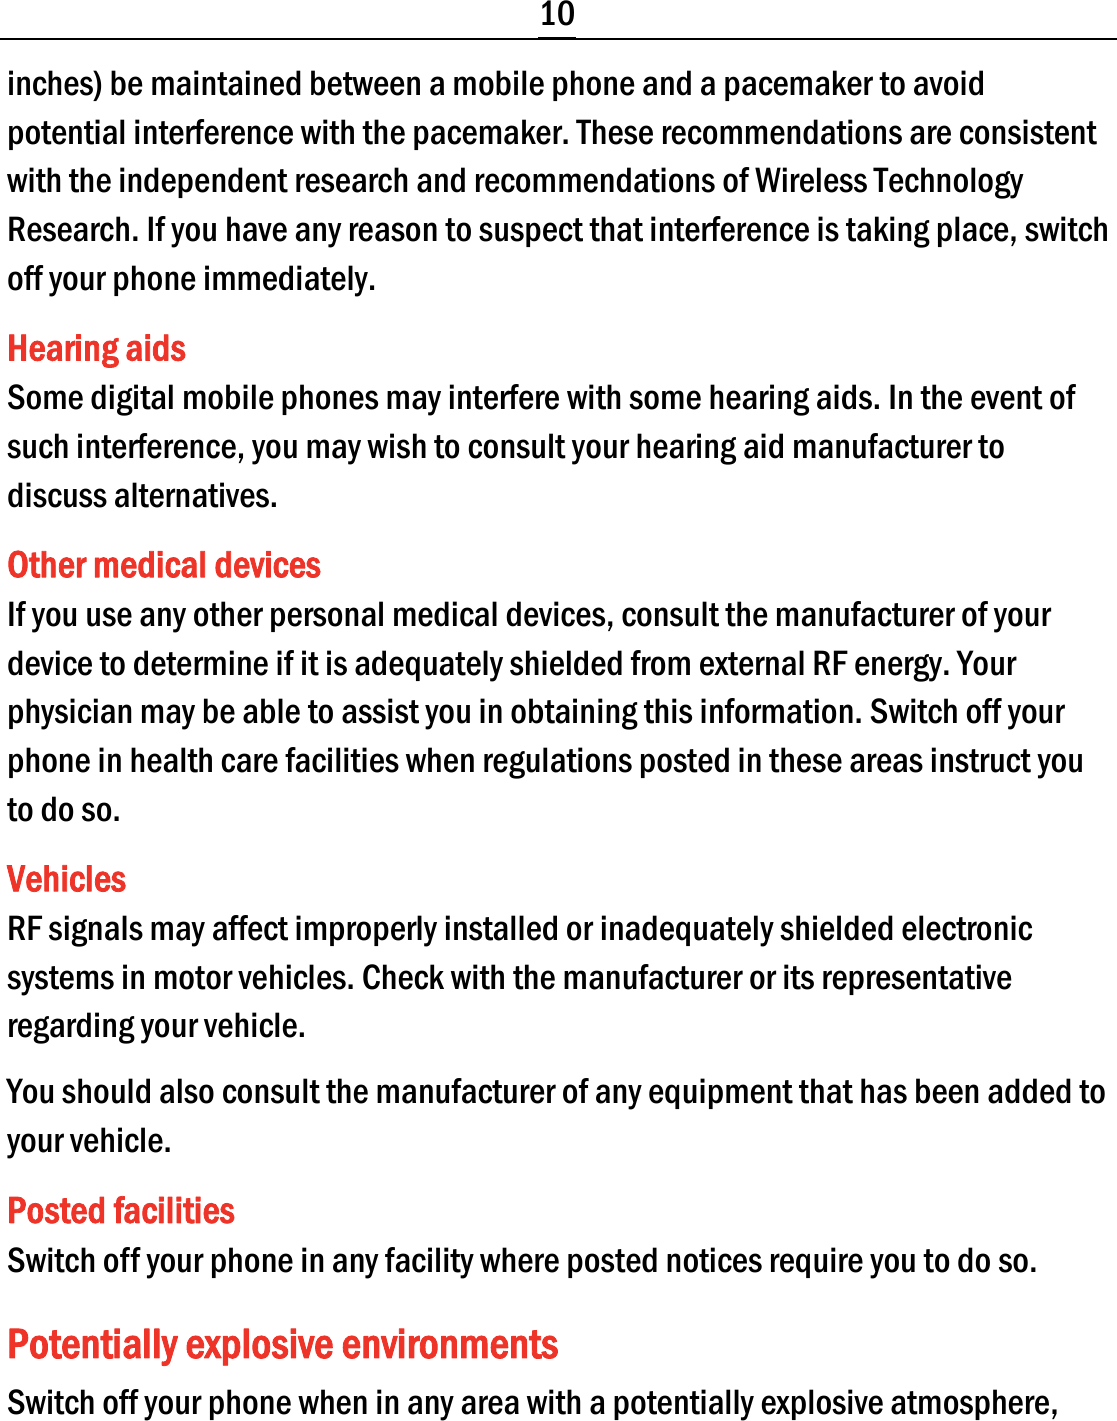  10 inches) be maintained between a mobile phone and a pacemaker to avoid potential interference with the pacemaker. These recommendations are consistent with the independent research and recommendations of Wireless Technology Research. If you have any reason to suspect that interference is taking place, switch off your phone immediately. Hearing aids Some digital mobile phones may interfere with some hearing aids. In the event of such interference, you may wish to consult your hearing aid manufacturer to discuss alternatives. Other medical devices If you use any other personal medical devices, consult the manufacturer of your device to determine if it is adequately shielded from external RF energy. Your physician may be able to assist you in obtaining this information. Switch off your phone in health care facilities when regulations posted in these areas instruct you to do so. Vehicles RF signals may affect improperly installed or inadequately shielded electronic systems in motor vehicles. Check with the manufacturer or its representative regarding your vehicle. You should also consult the manufacturer of any equipment that has been added to your vehicle. Posted facilities Switch off your phone in any facility where posted notices require you to do so. Potentially explosive environments Switch off your phone when in any area with a potentially explosive atmosphere, 